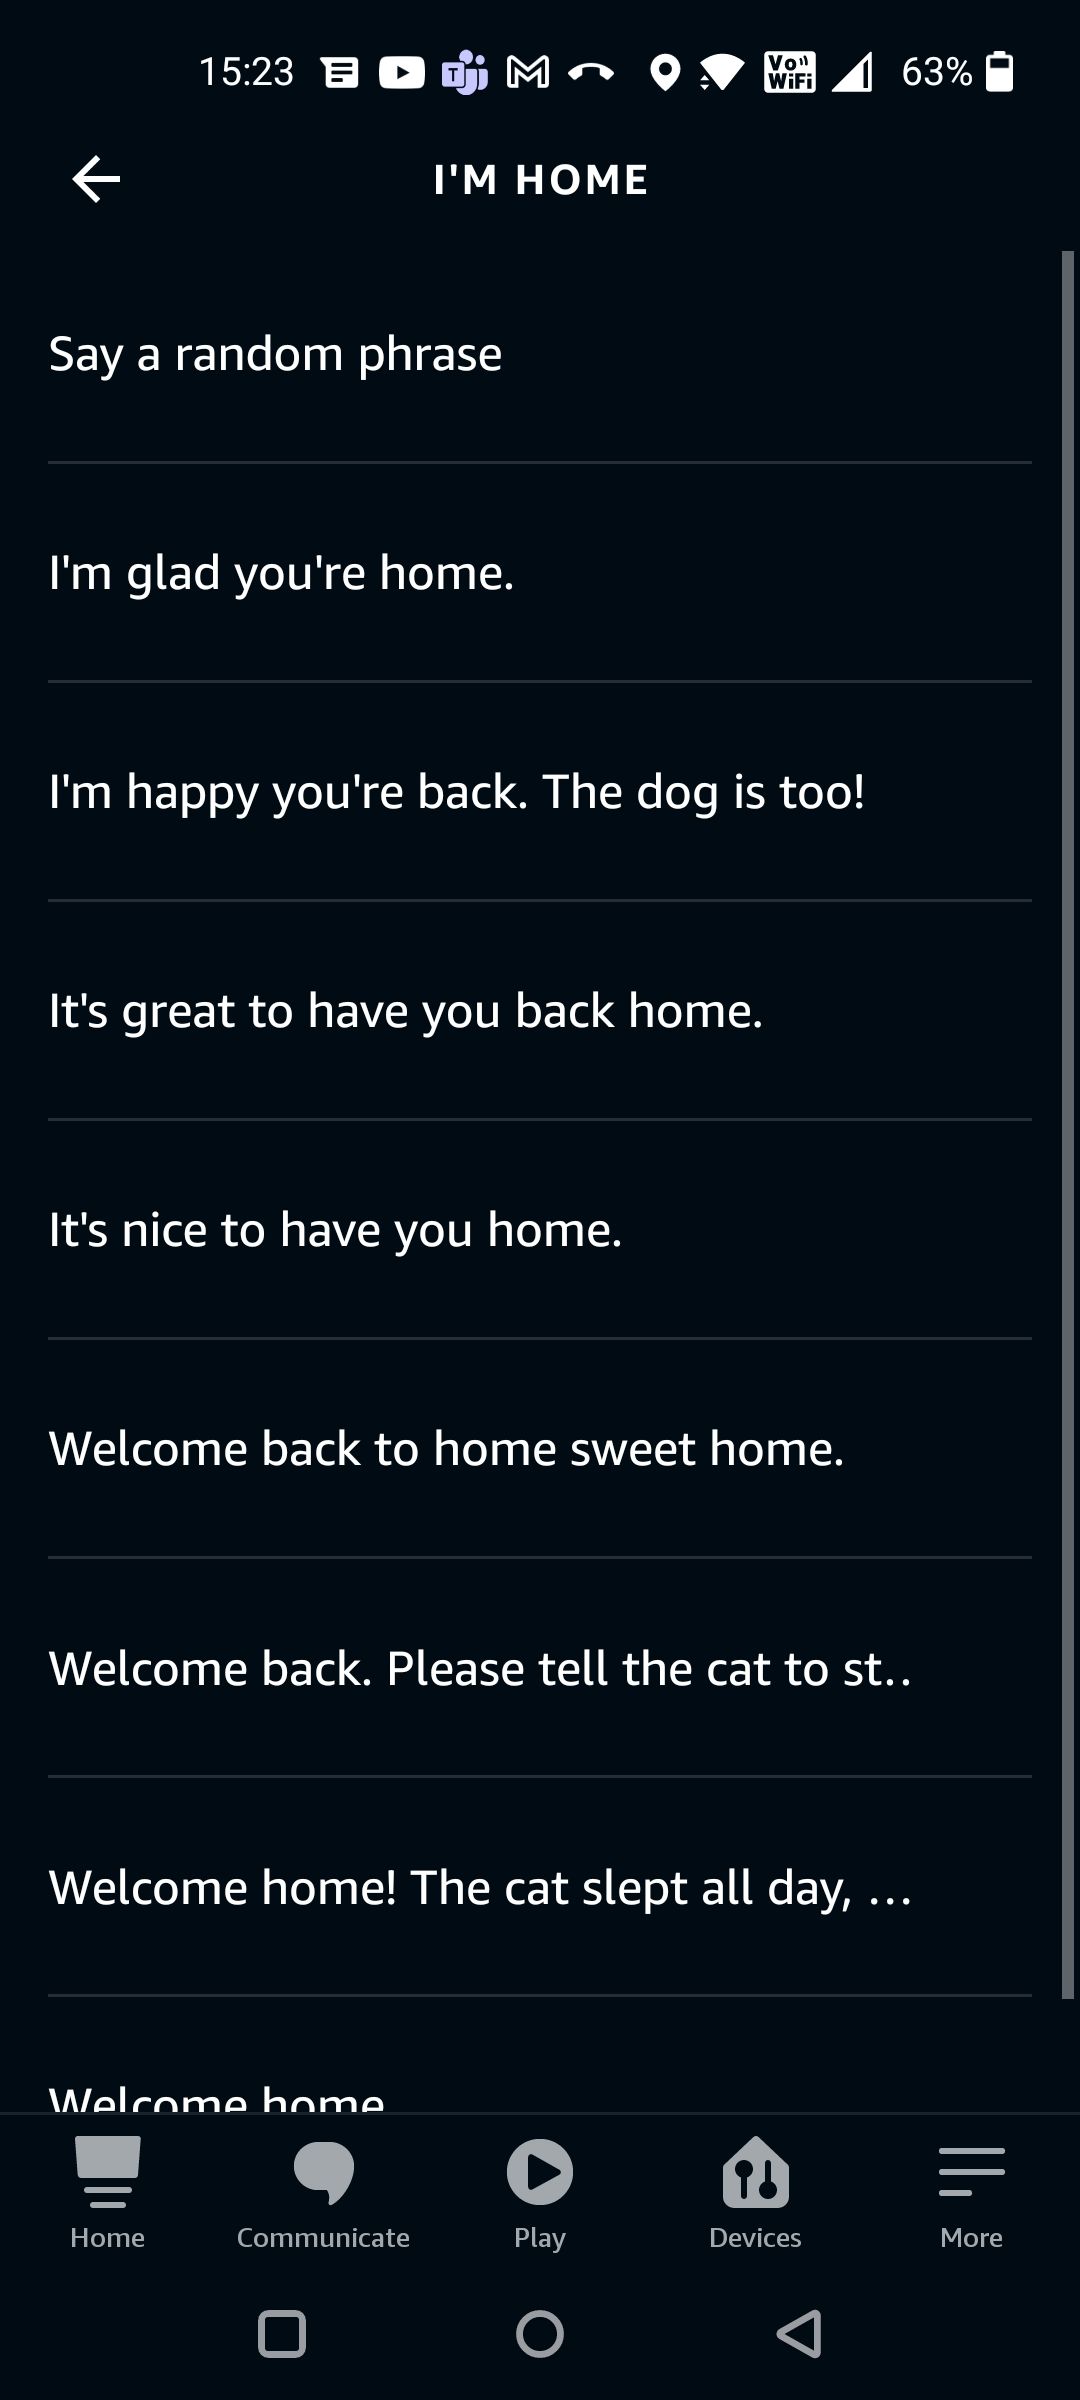 I'm Home Phrases for Welcome Home Routine